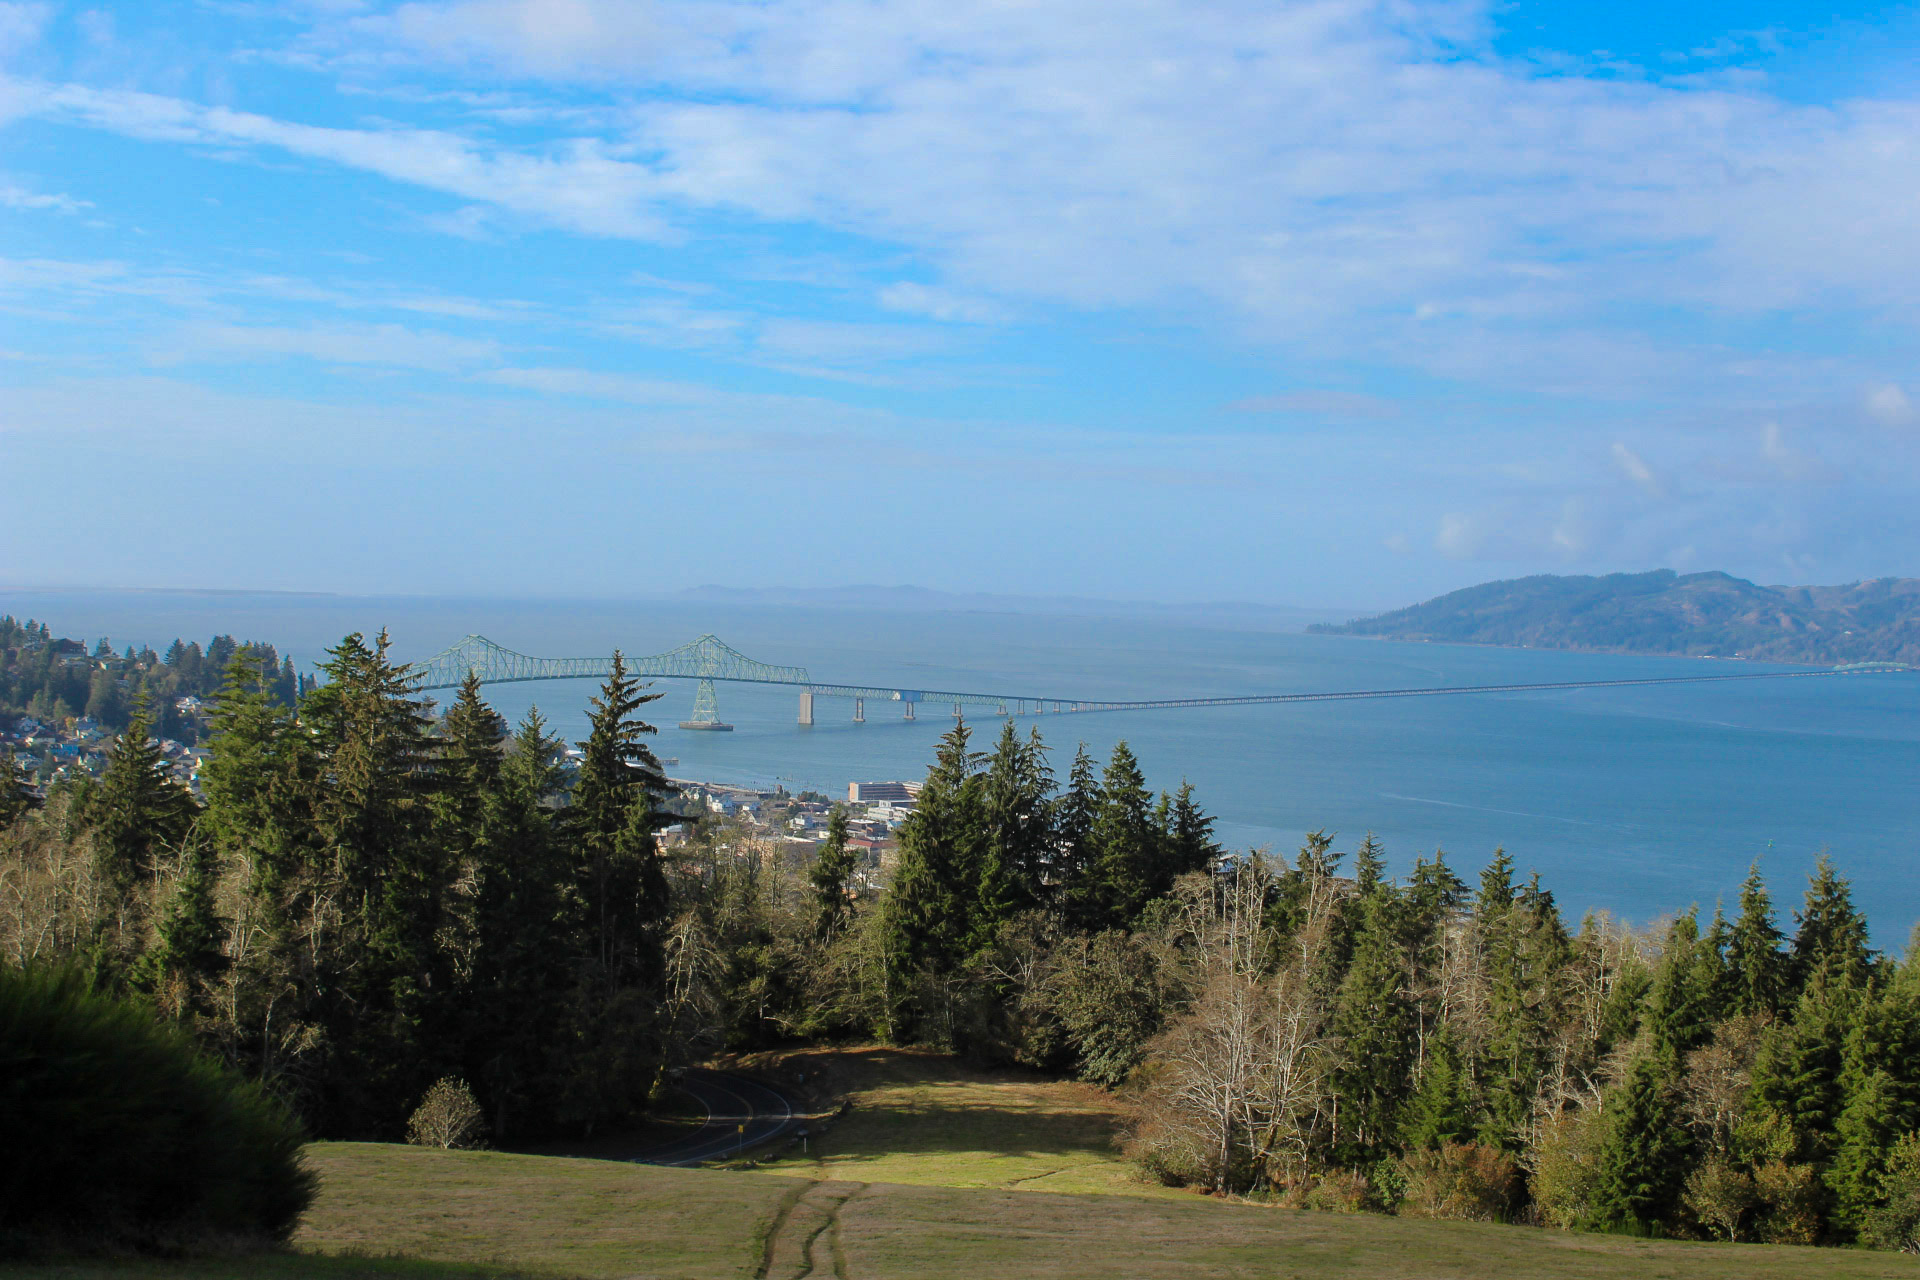 View of Columbia River and Astoria-Megler Bridge, one of the 33 best things to do in Astoria, Oregon.